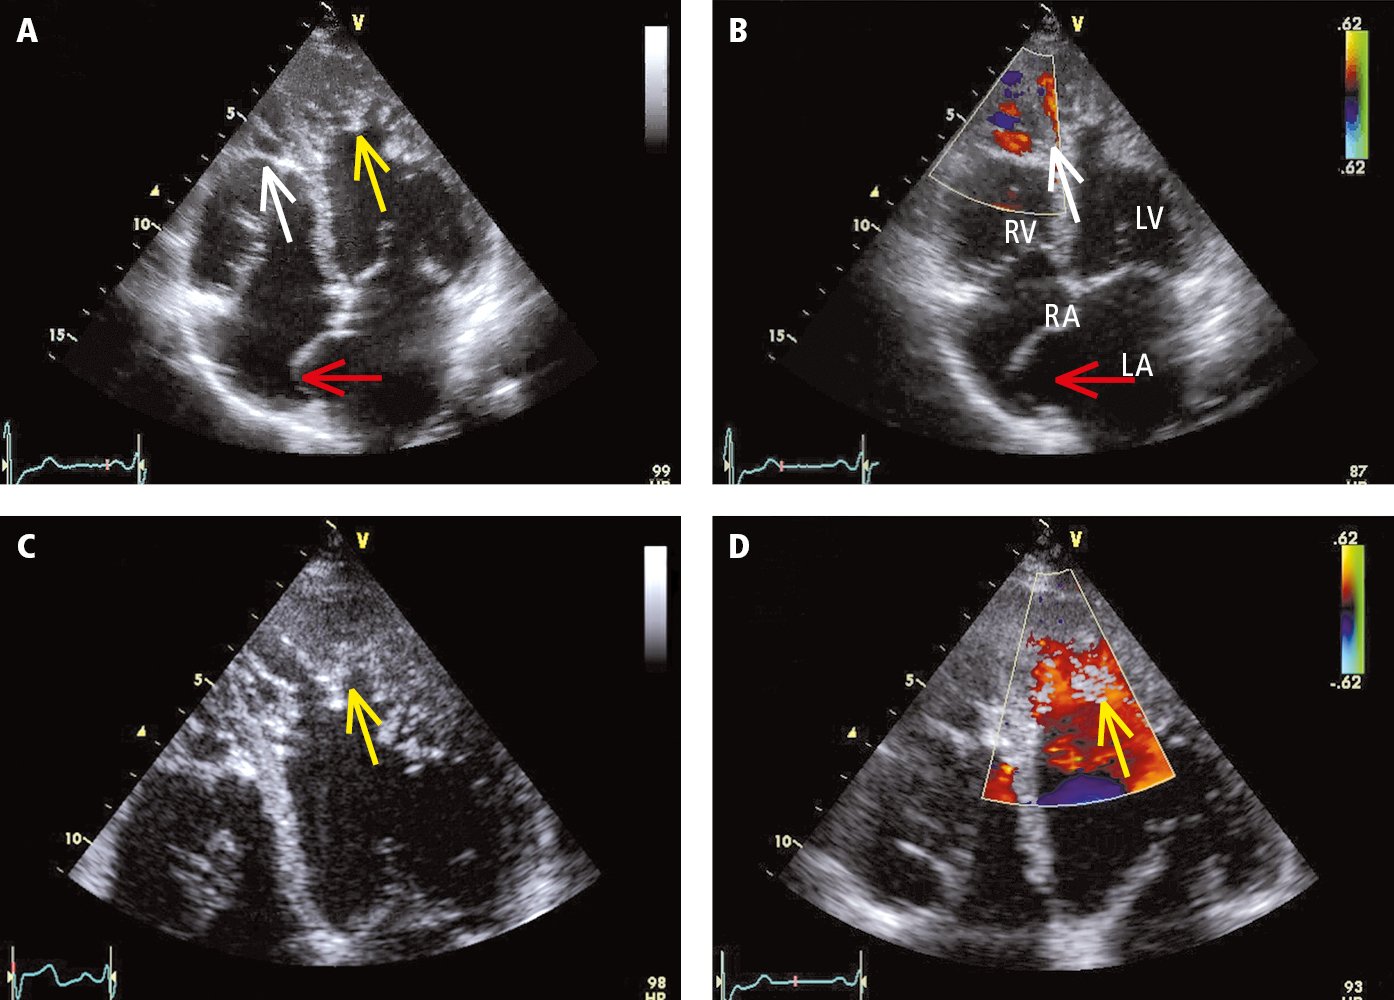 Figure 031_2319.  Transthoracic echocardiography (TTE) of a patient with left ventricular noncompaction (apical 4-chamber view, standard probe placement):  A , 2D imaging;  B , color Doppler examination;  C , enlarged panel A;  D , color Doppler examination. Yellow arrows mark the spongiform structure of the myocardium in the mid and apical segments of the left ventricle (LV). The layer of the abnormal cardiac muscle is more than twice as thick as the healthy compact layer. A healthy apex of the right ventricle (RV) usually has numerous myocardial trabeculae. For this reason, despite the significantly increased trabeculation (white arrow), it is not clear if this finding can be considered abnormal. Color Doppler revealed blood flow penetrating deep into both ventricular apexes, which indicates that tissue in this area is not solid (a solid tissue structure would be typical for apical hypertrophic cardiomyopathy or ventricular cavities filled with thrombi or other masses). The interatrial septum is markedly protruding to the right (red arrow), which meets the diagnostic criteria for atrial septal aneurysm. LA, left atrium; RA, right atrium.  Figure courtesy of Dr Andrzej Gackowski.  